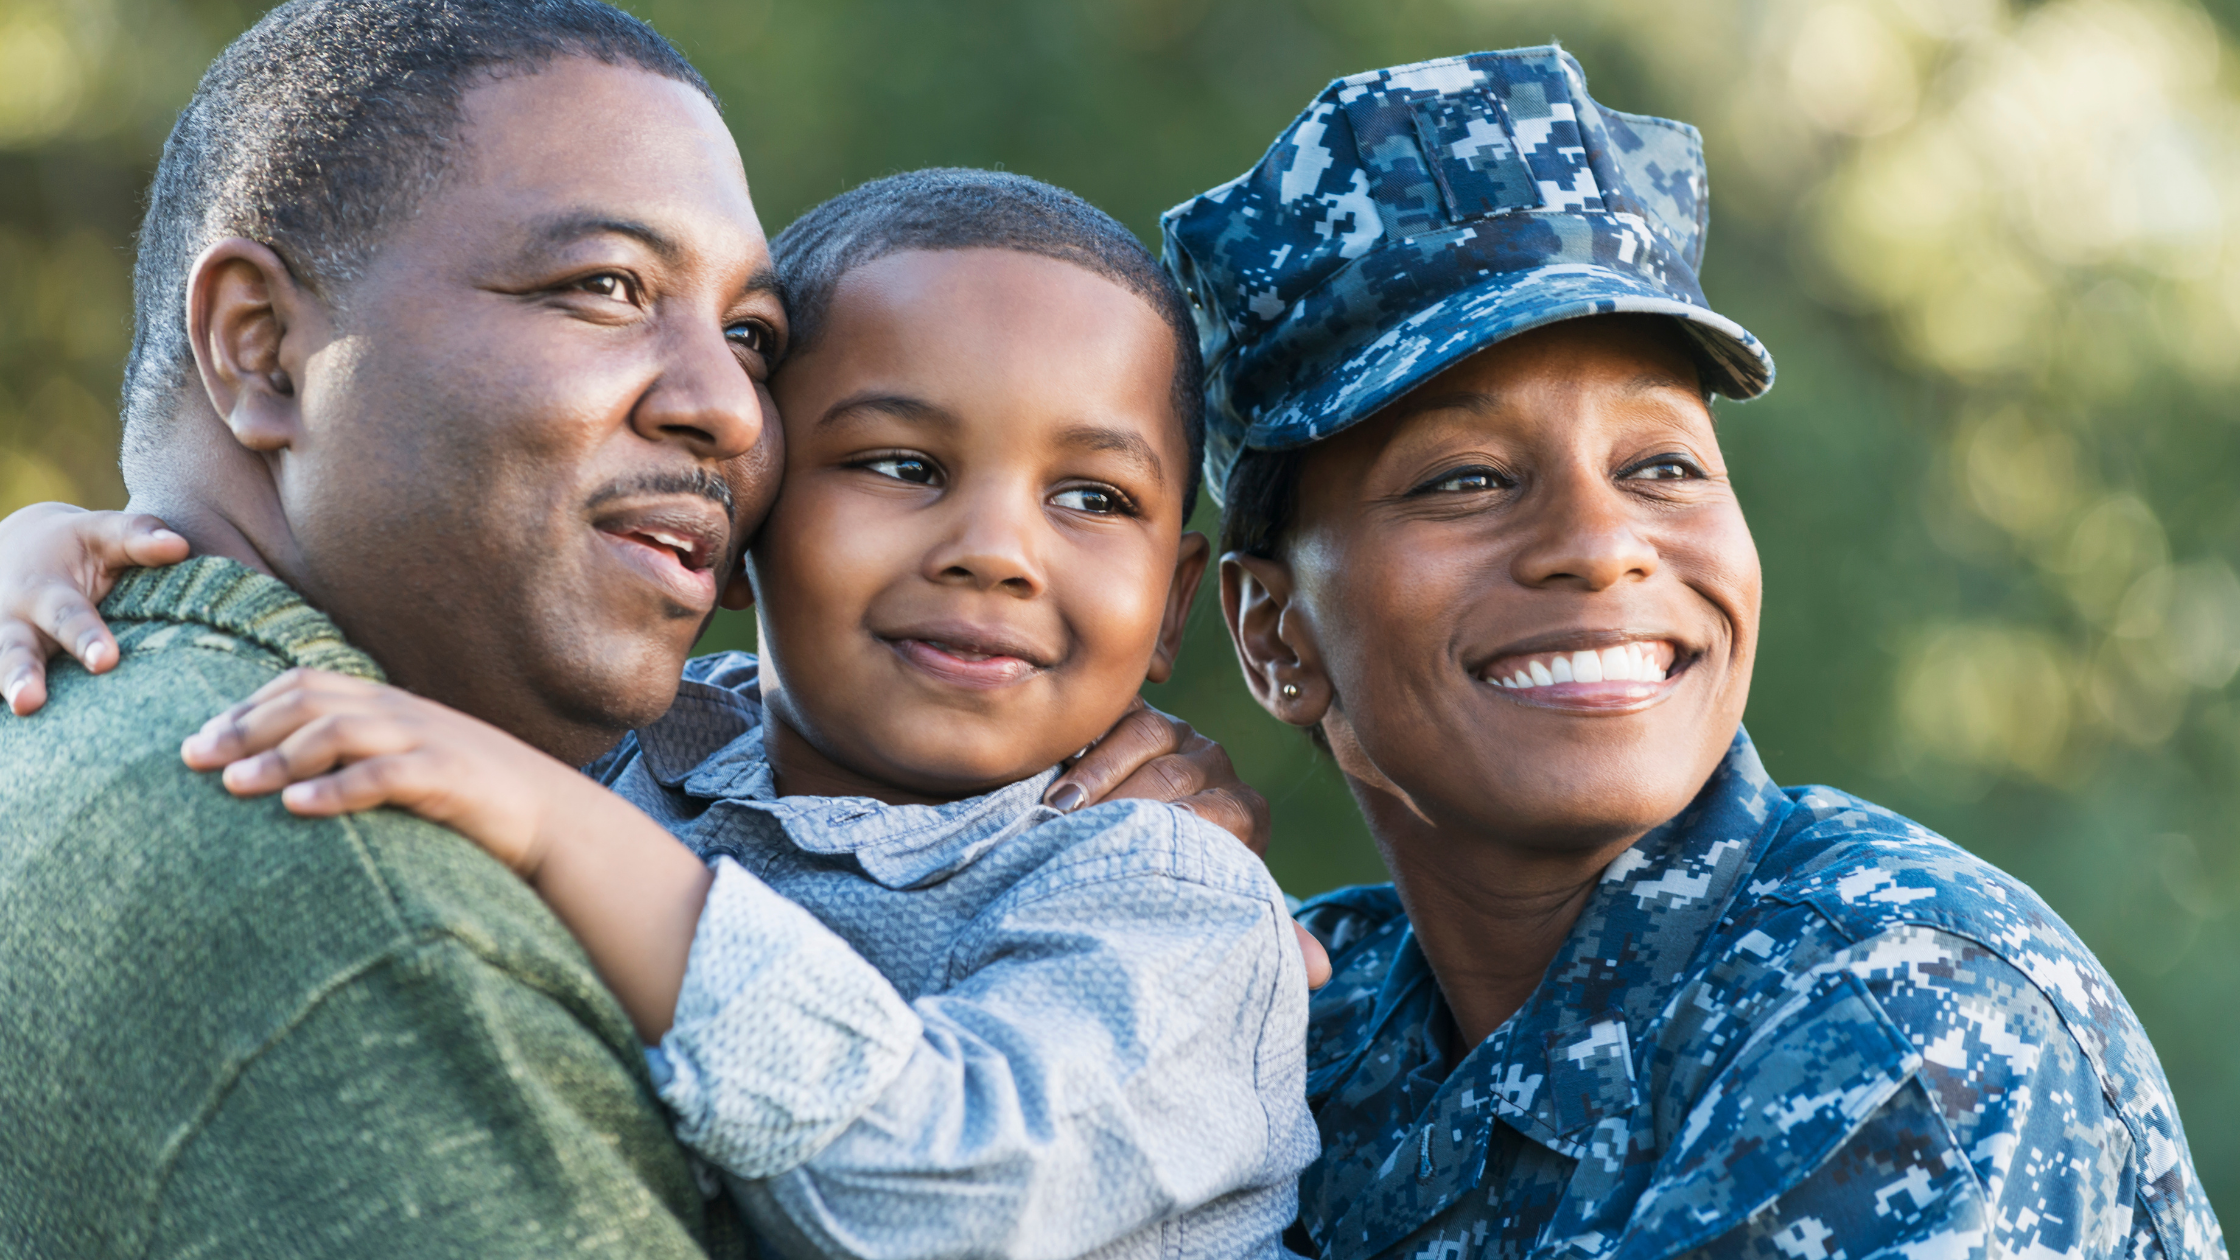 Military Families Thank Their Respite Child Care Providers